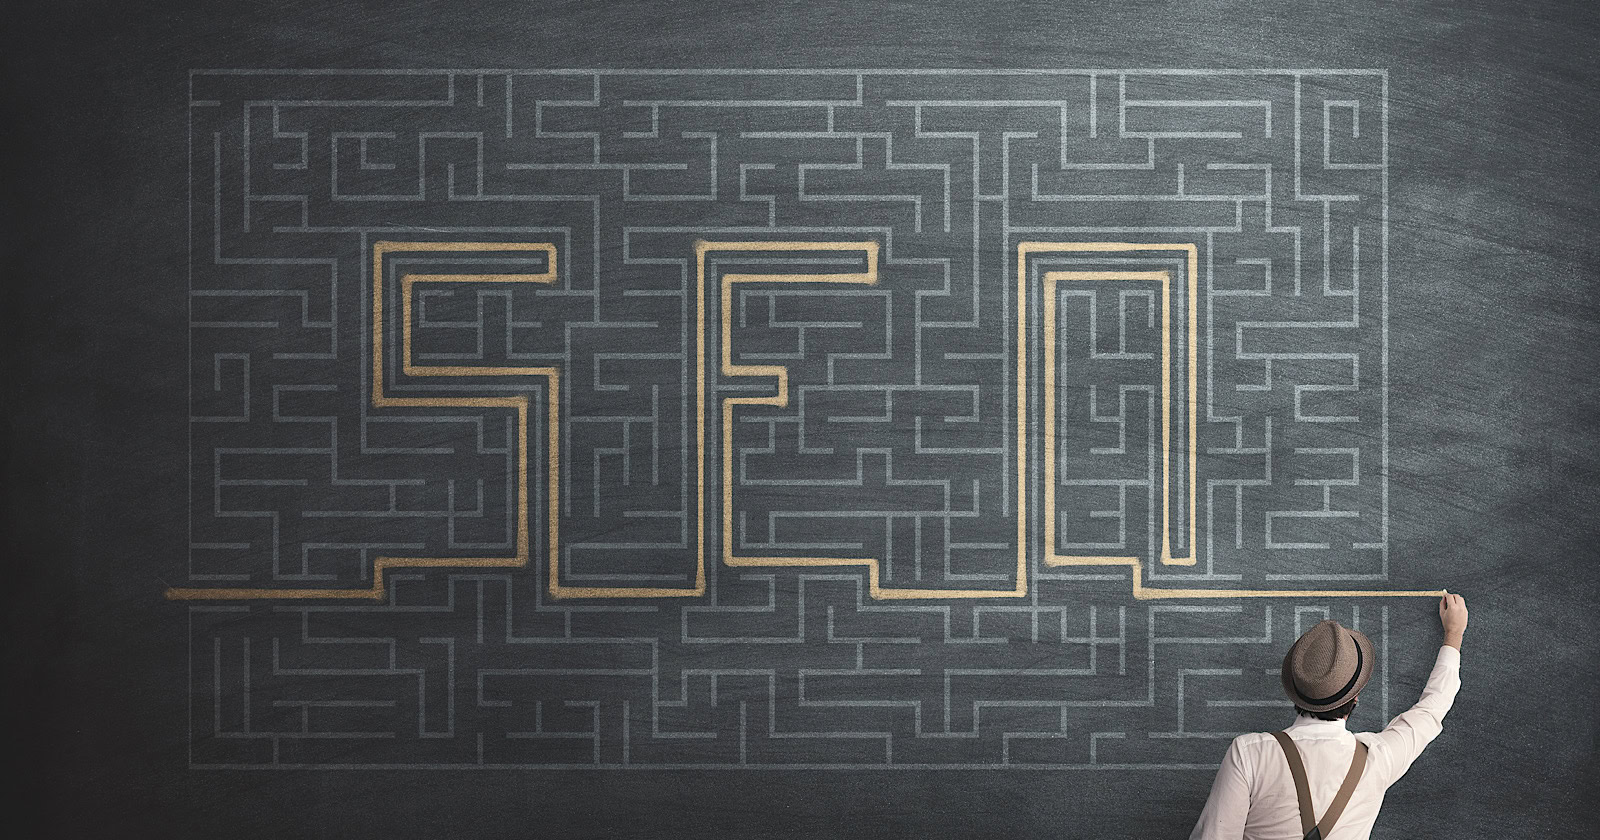 Google’s Gary Illyes On AI, Site Migrations, & “SEO Is Dead” Claims via @sejournal, @MattGSouthern